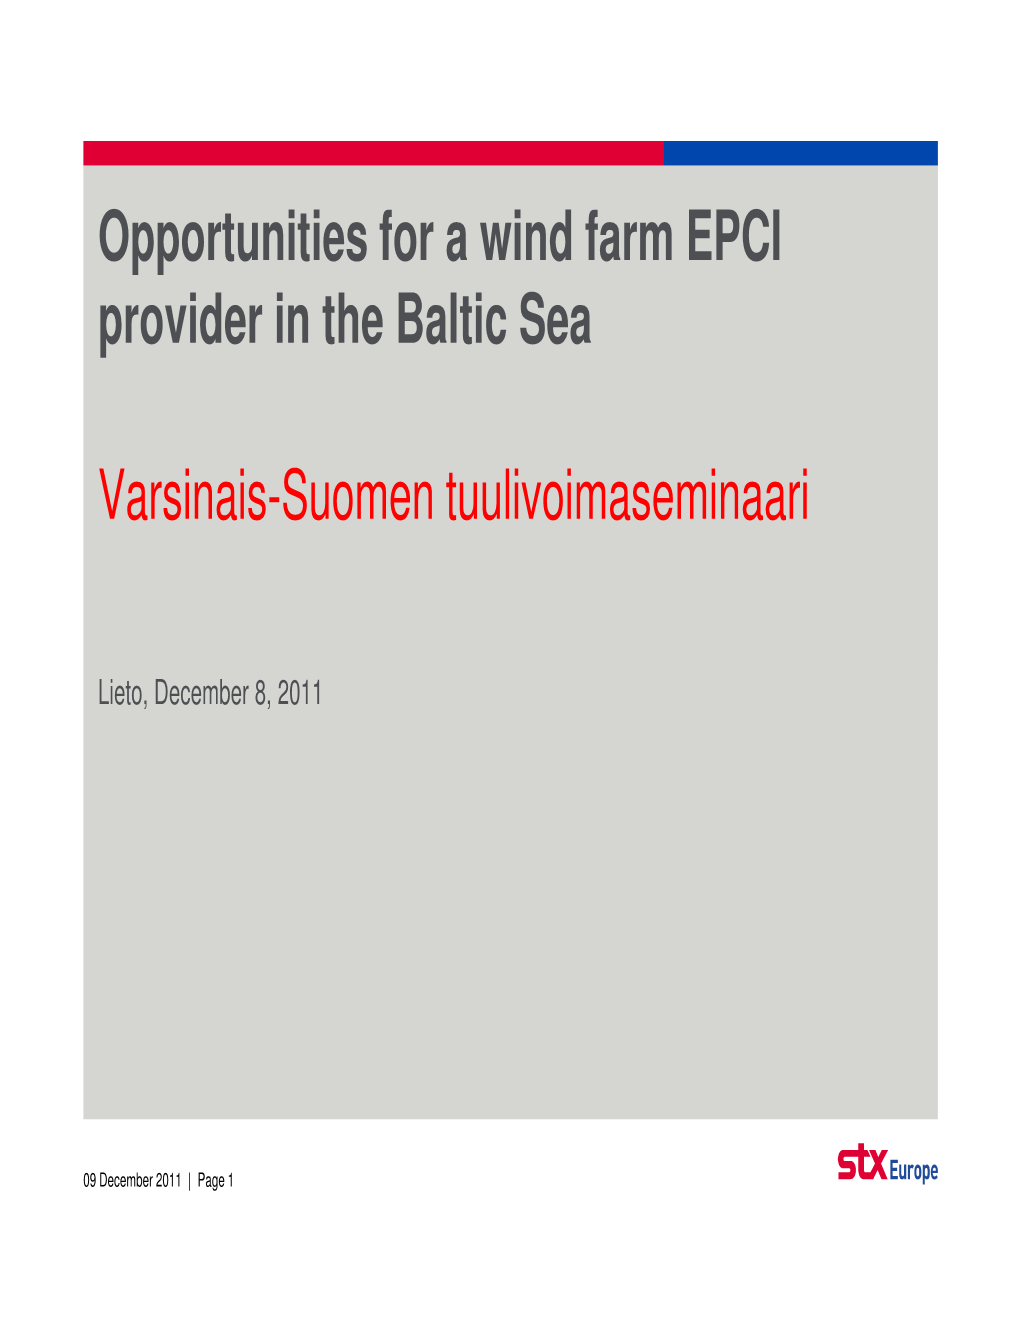 Opportunities for a Wind Farm EPCI Provider in the Baltic Sea Varsinais